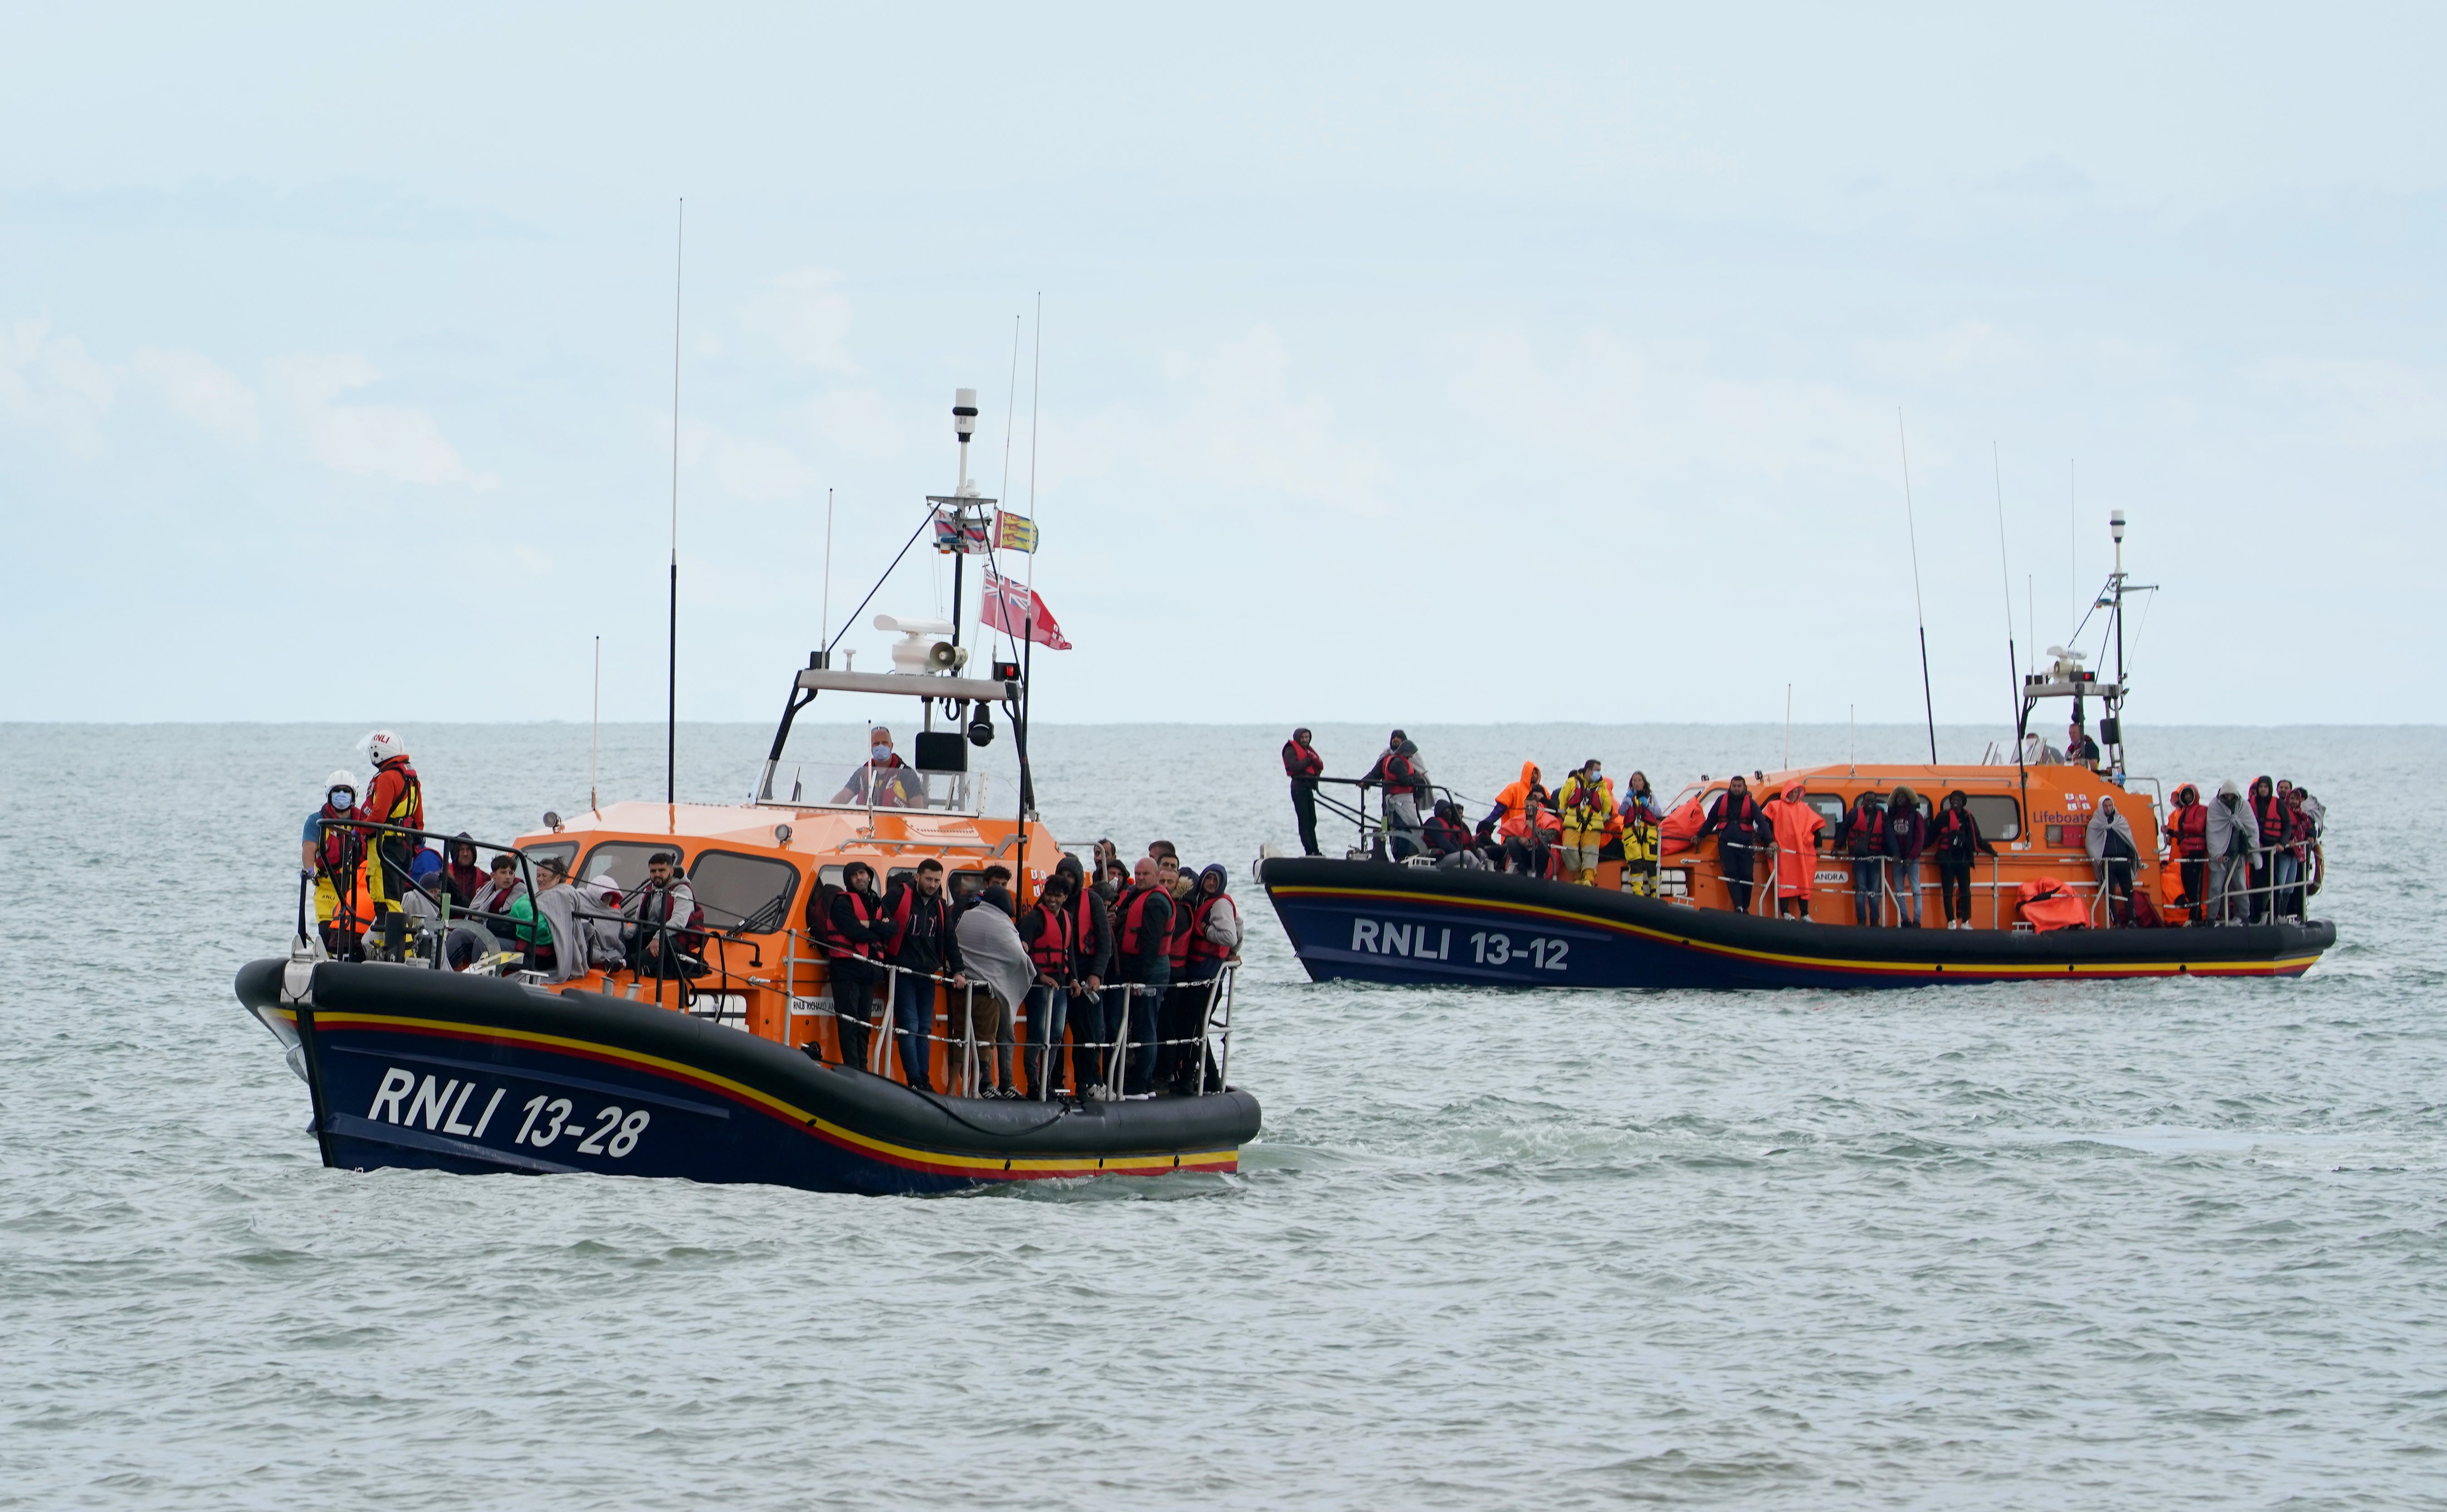 Dungeness and Hastings Lifeboats carrying groups of people thought to be migrants arrive in to Dungeness, Kent, following small boat incidents in the Channel (Gareth Fuller/PA)